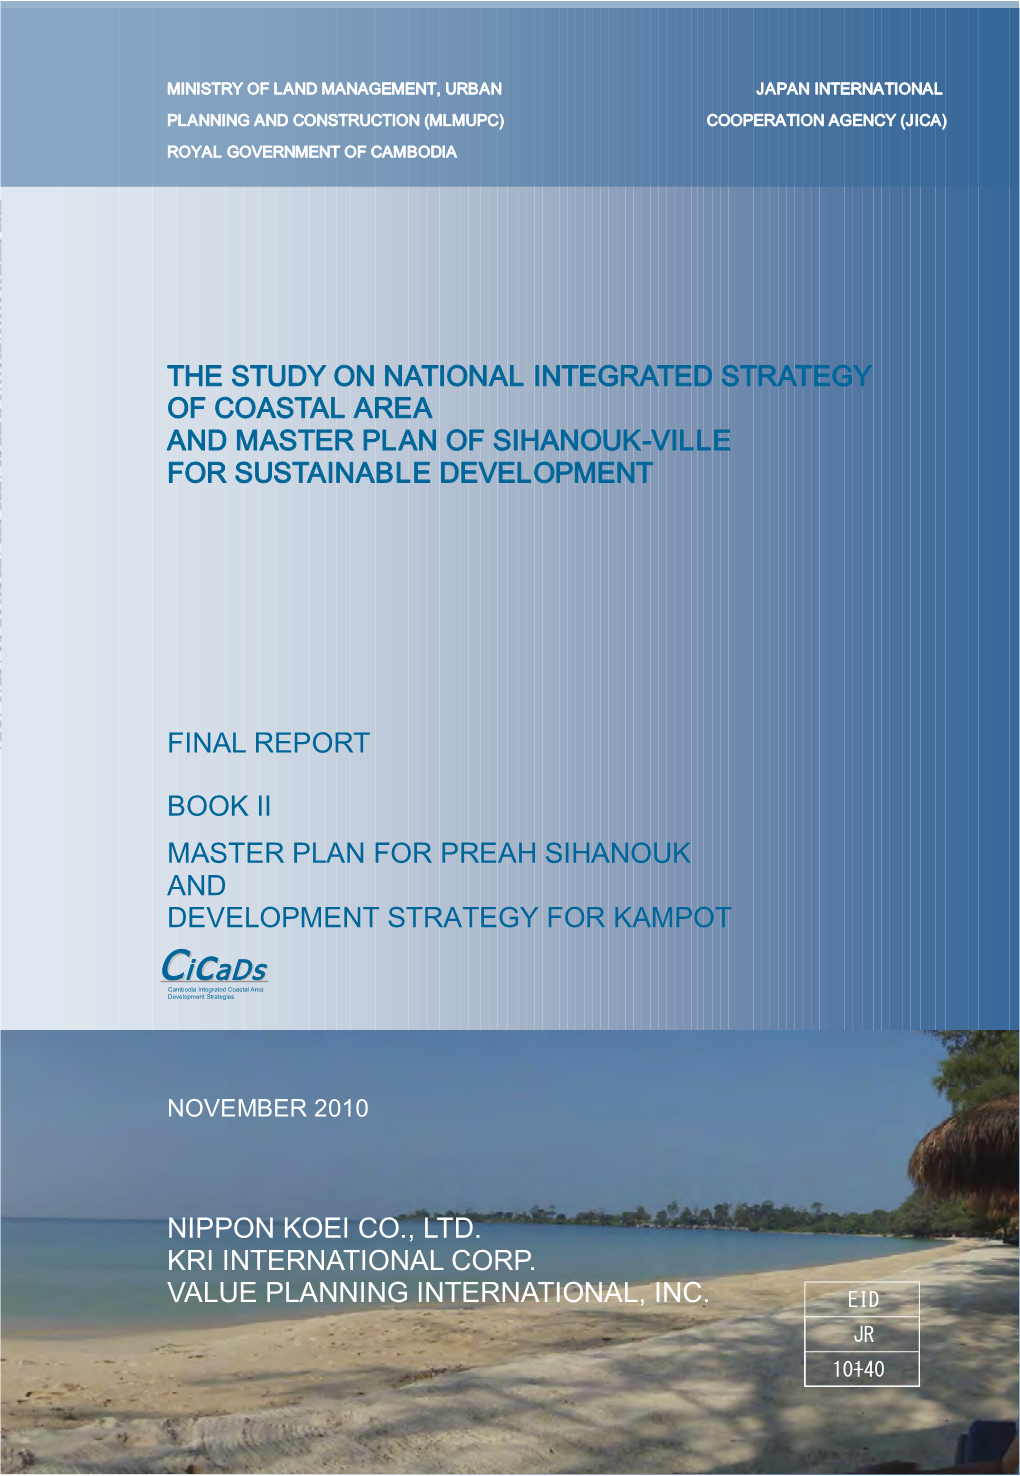 The Study on National Integrated Strategy of Coastal Area and Master Plan of Sihanouk-Ville for Sustainable Development